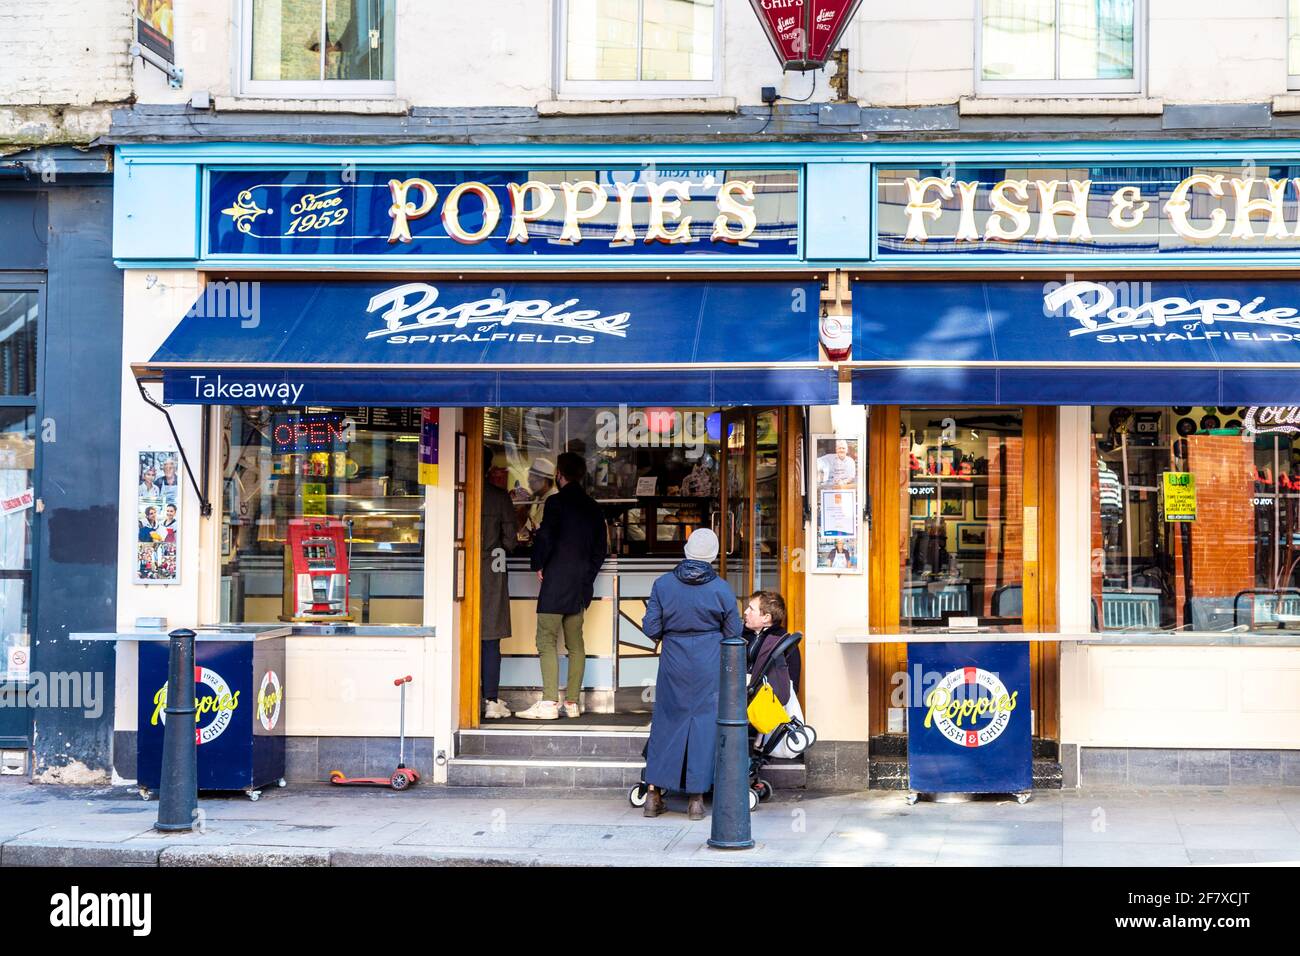 Exterior of famous Poppies Fish & Chips in Spitalfields, Shoreditch, London, UK Stock Photo